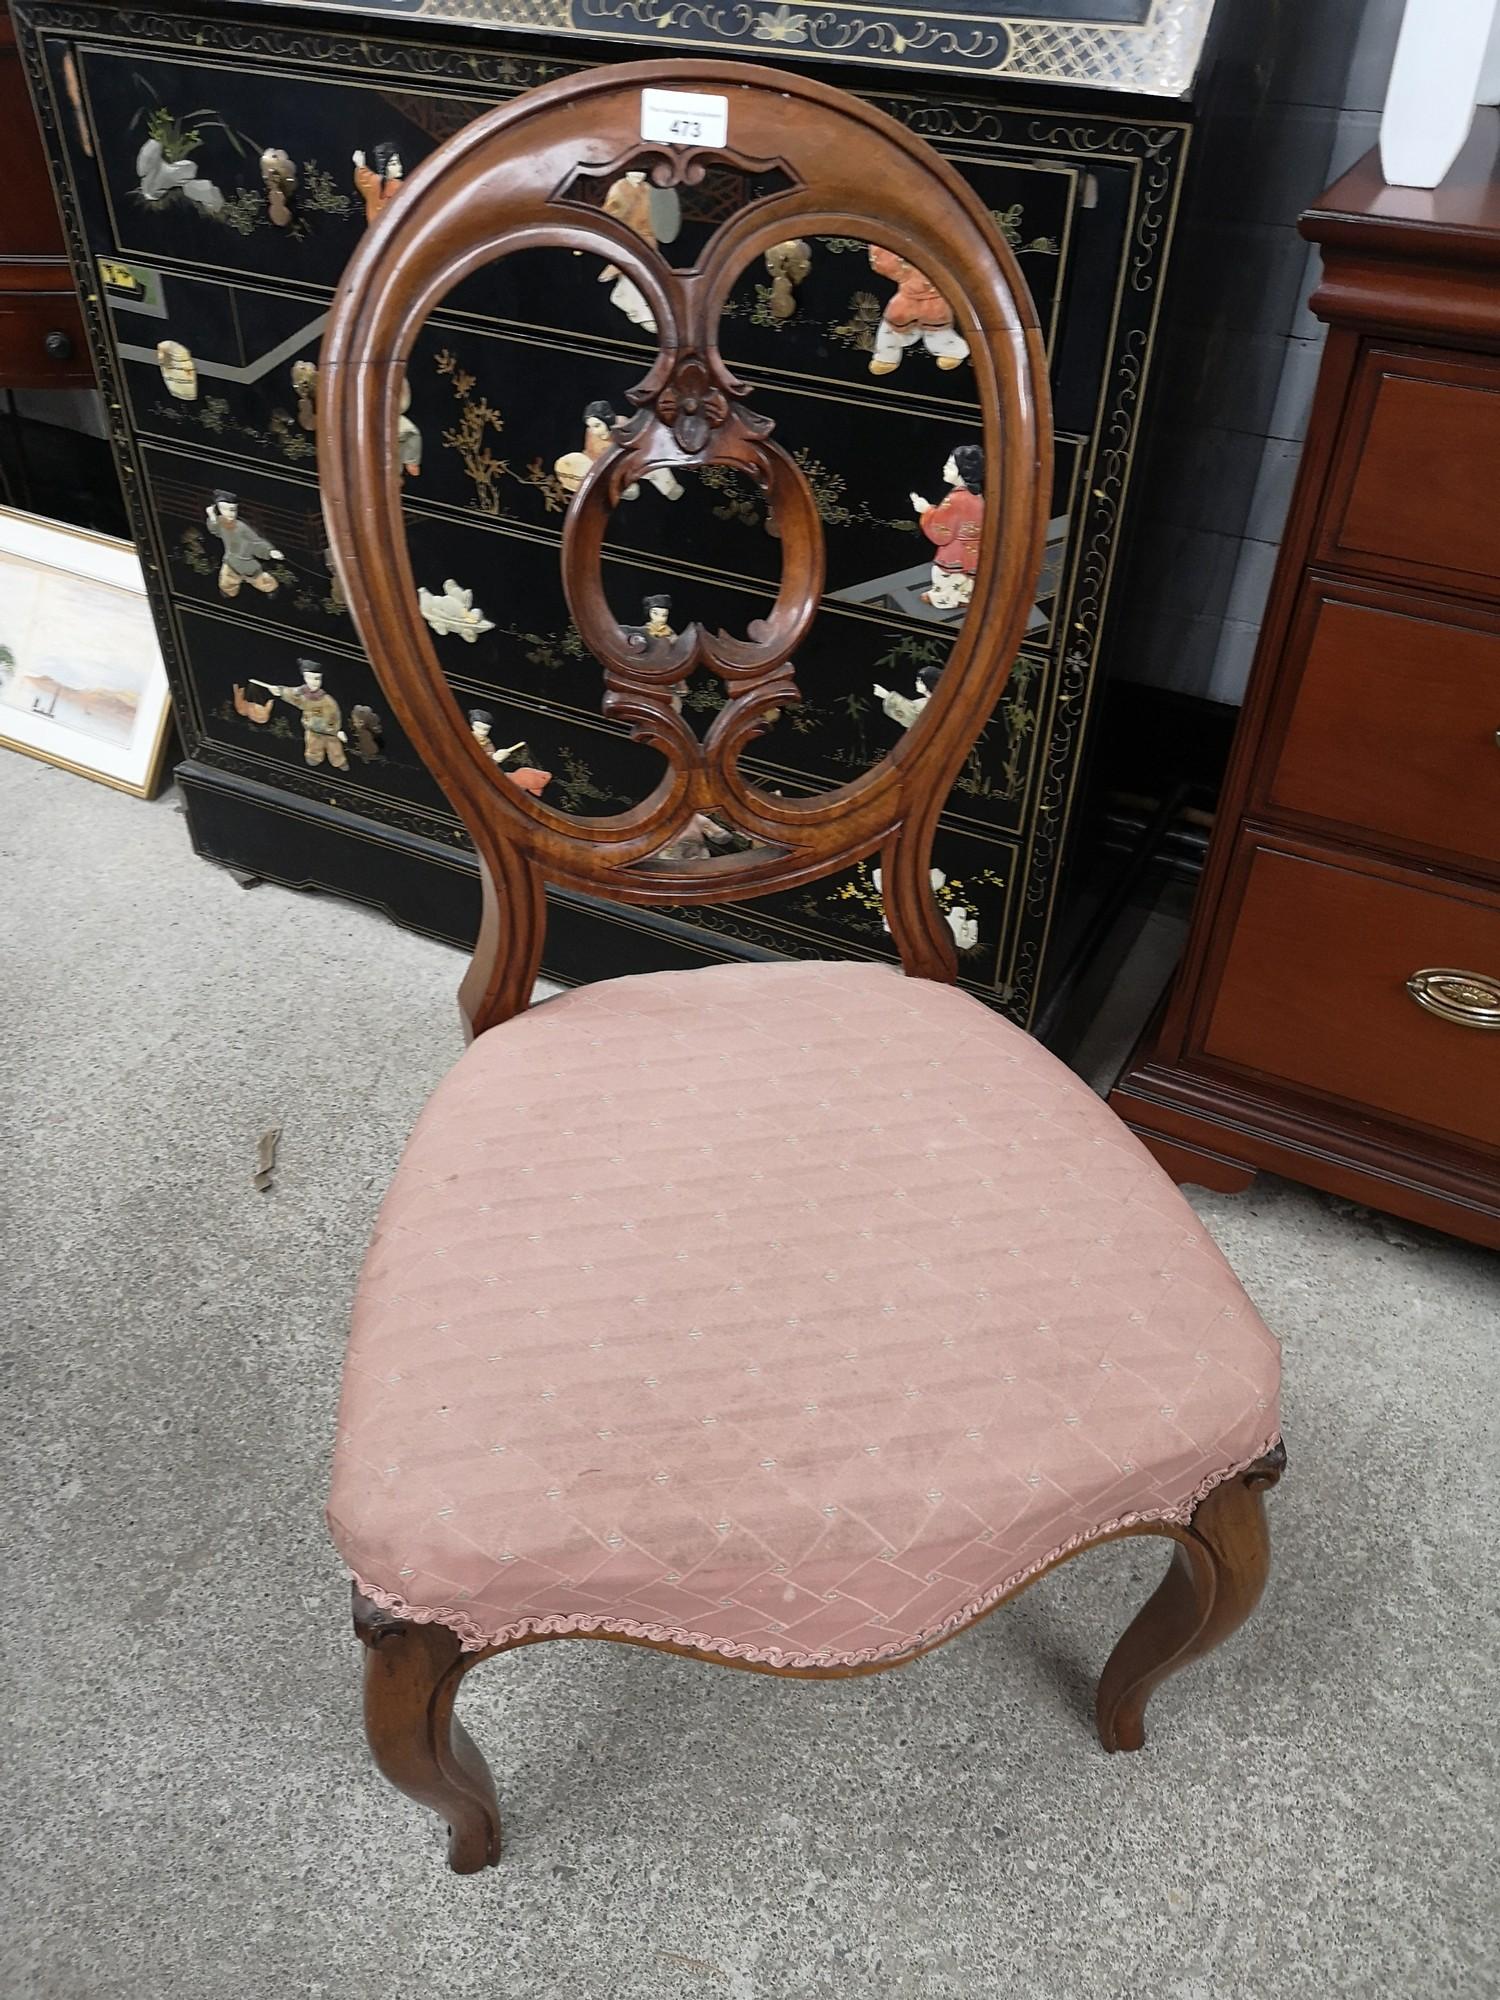 Stunning victorian parlour chair with pink silk upholstery. - Image 3 of 3